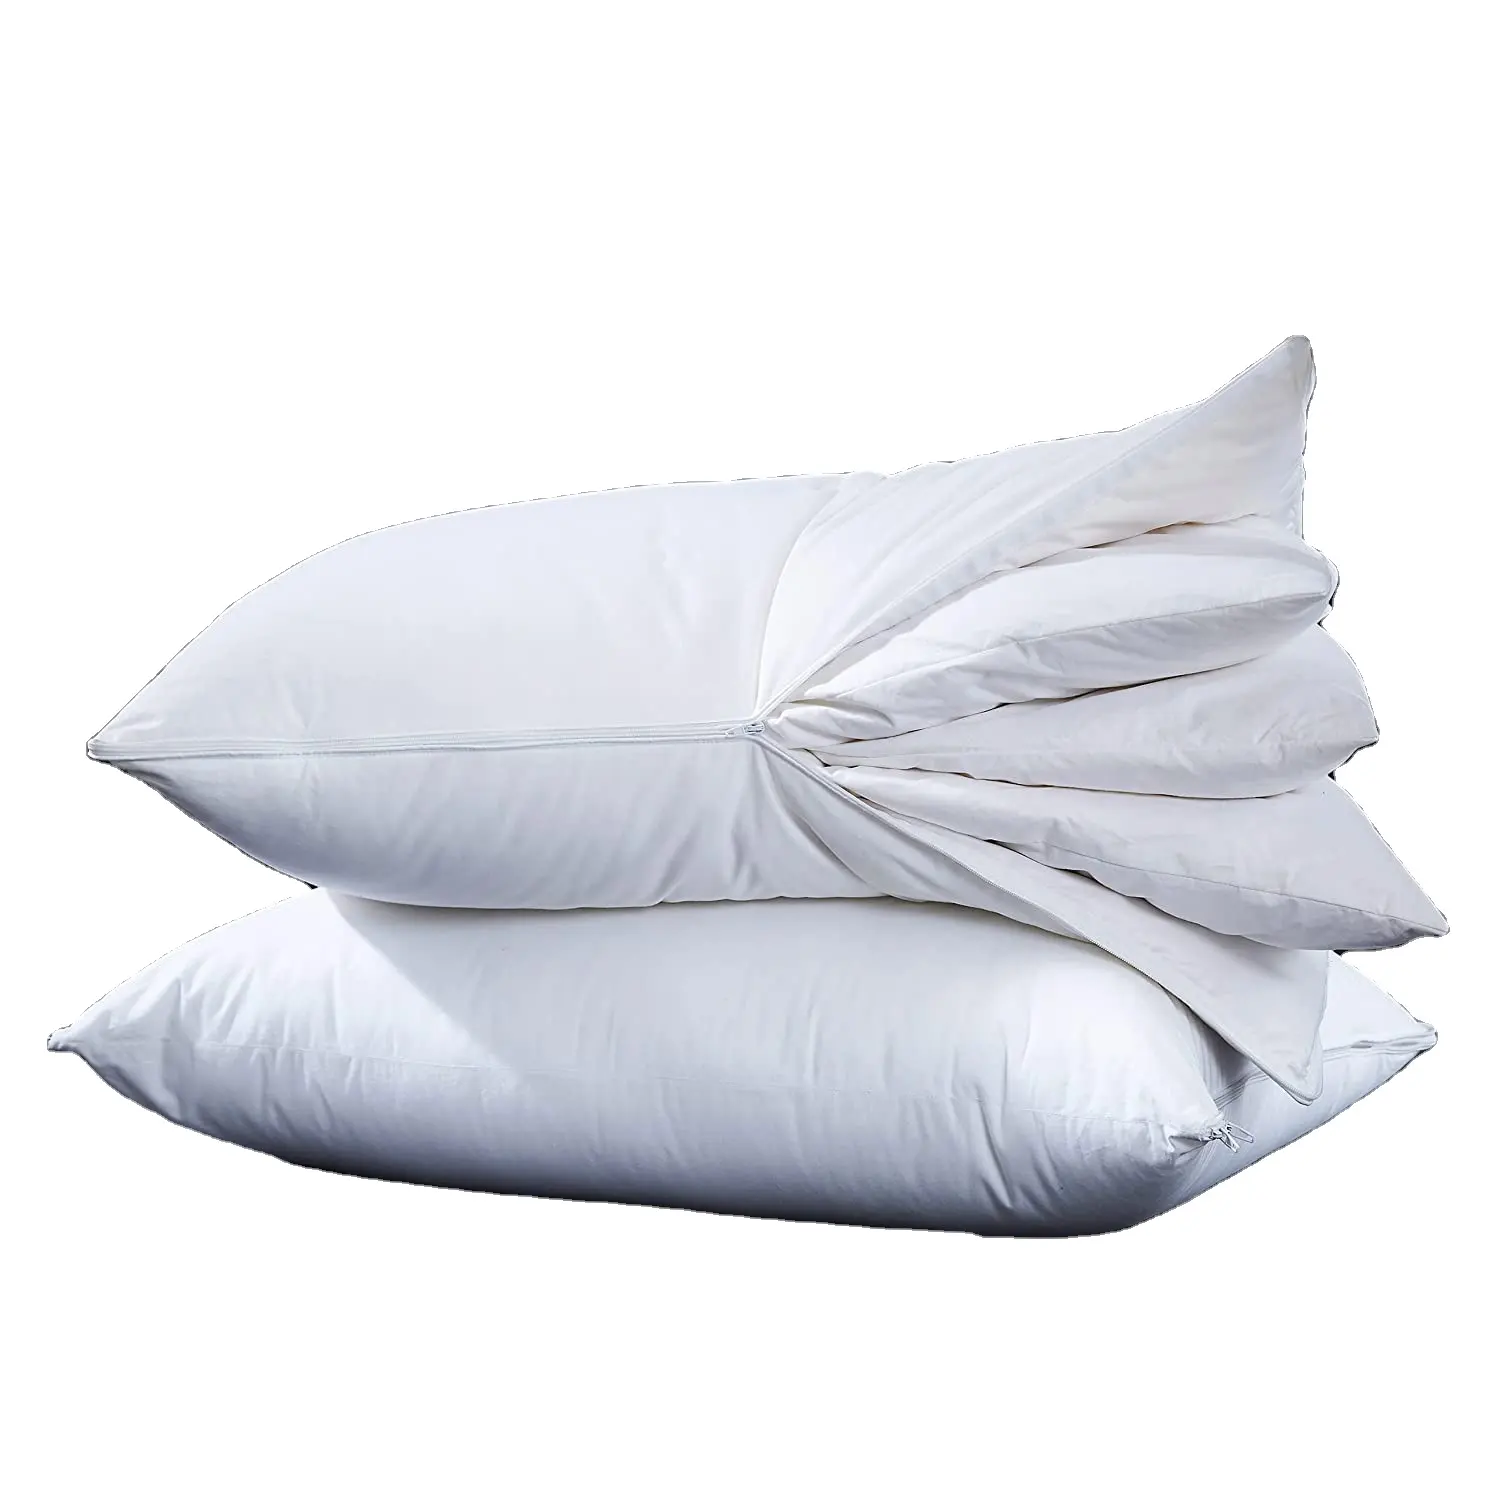 100 Cotton Hotel Quality Bed Downy Pillow Core Multi Layers Adjustable Chillax Eiderdown Head Pillow Function Goose Down Pillow